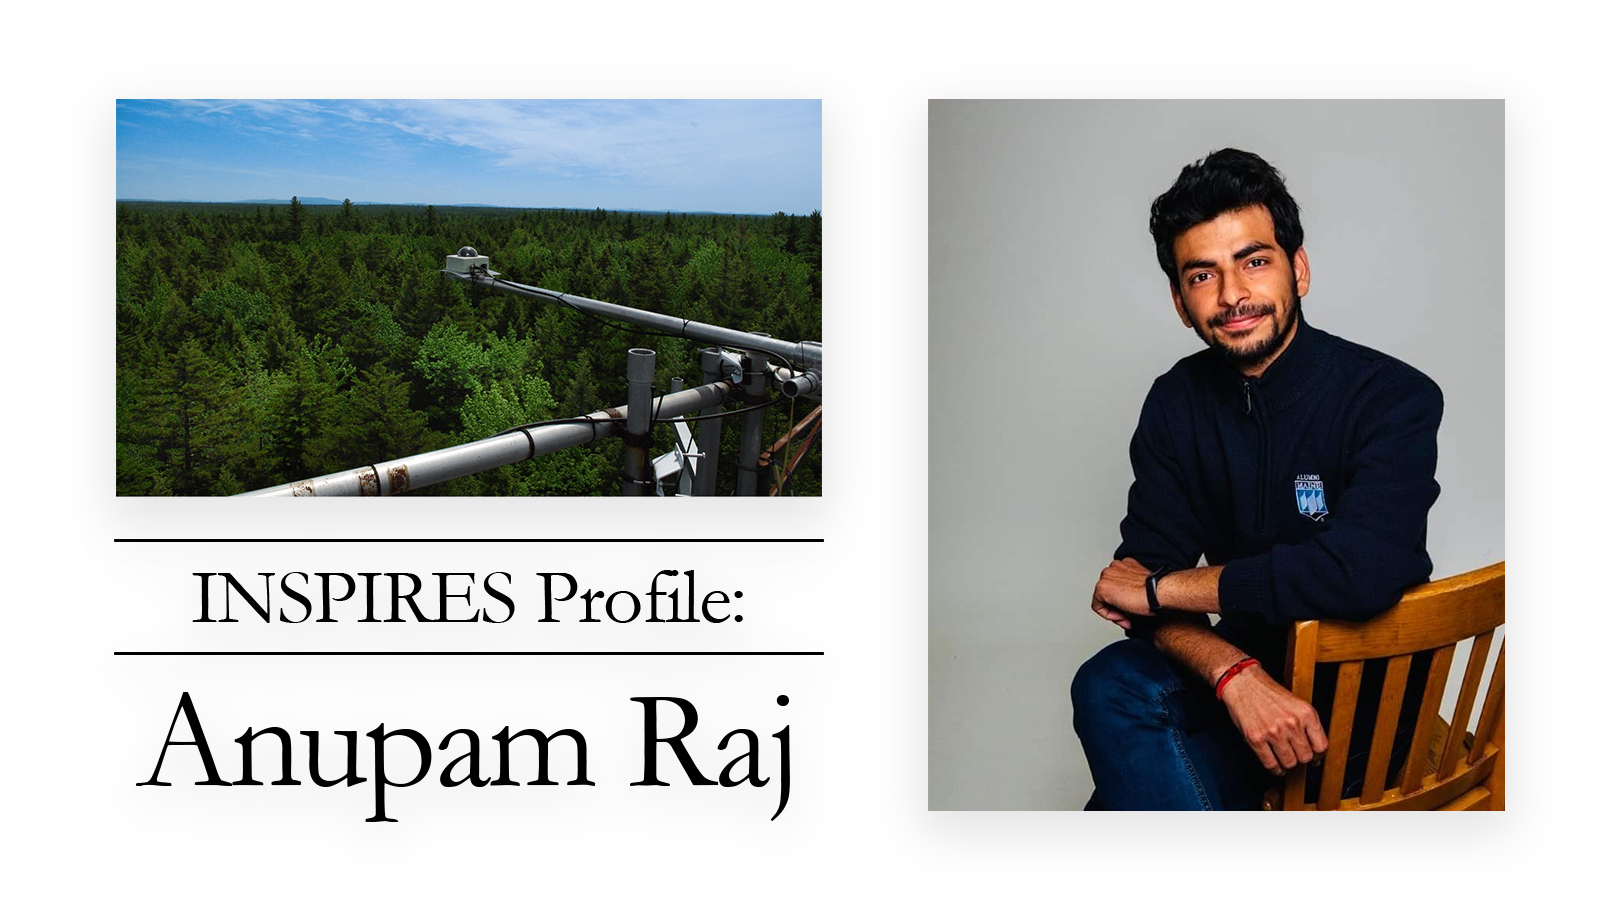 Text reads "INSPIRES Profile: Anupam Raj" with photo of sensor of forest and Raj sitting on a chair posed for a portrait